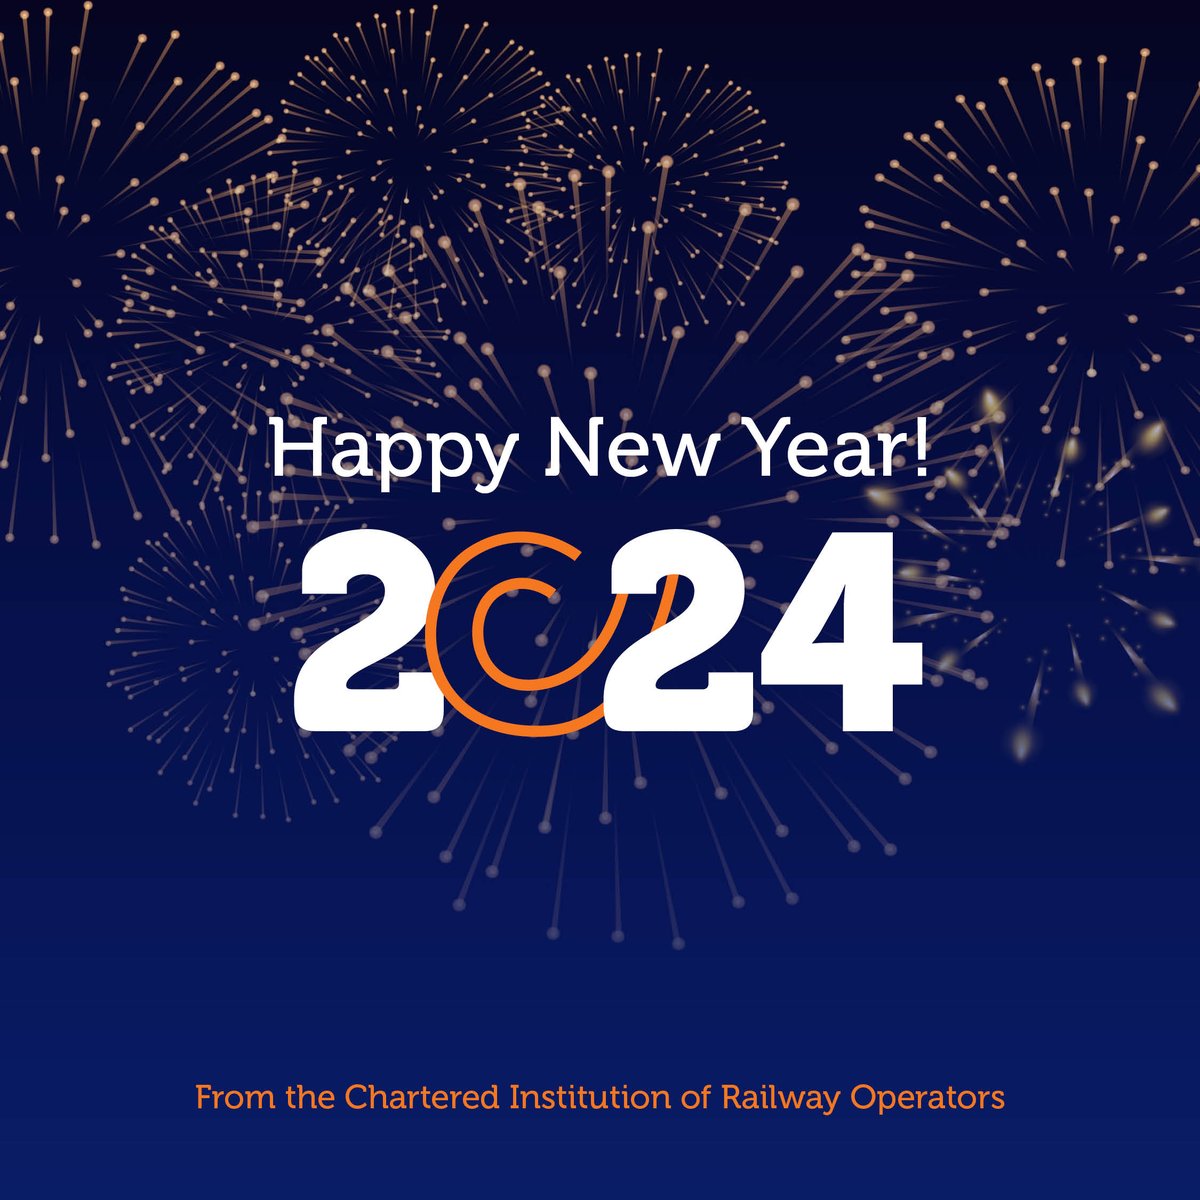 2023 has been an excellent year for the Chartered Institution of Railway Operators. Do you have a professional goal for 2024? We’d love to hear your aspirations, let us know… #HappyNewYear2024